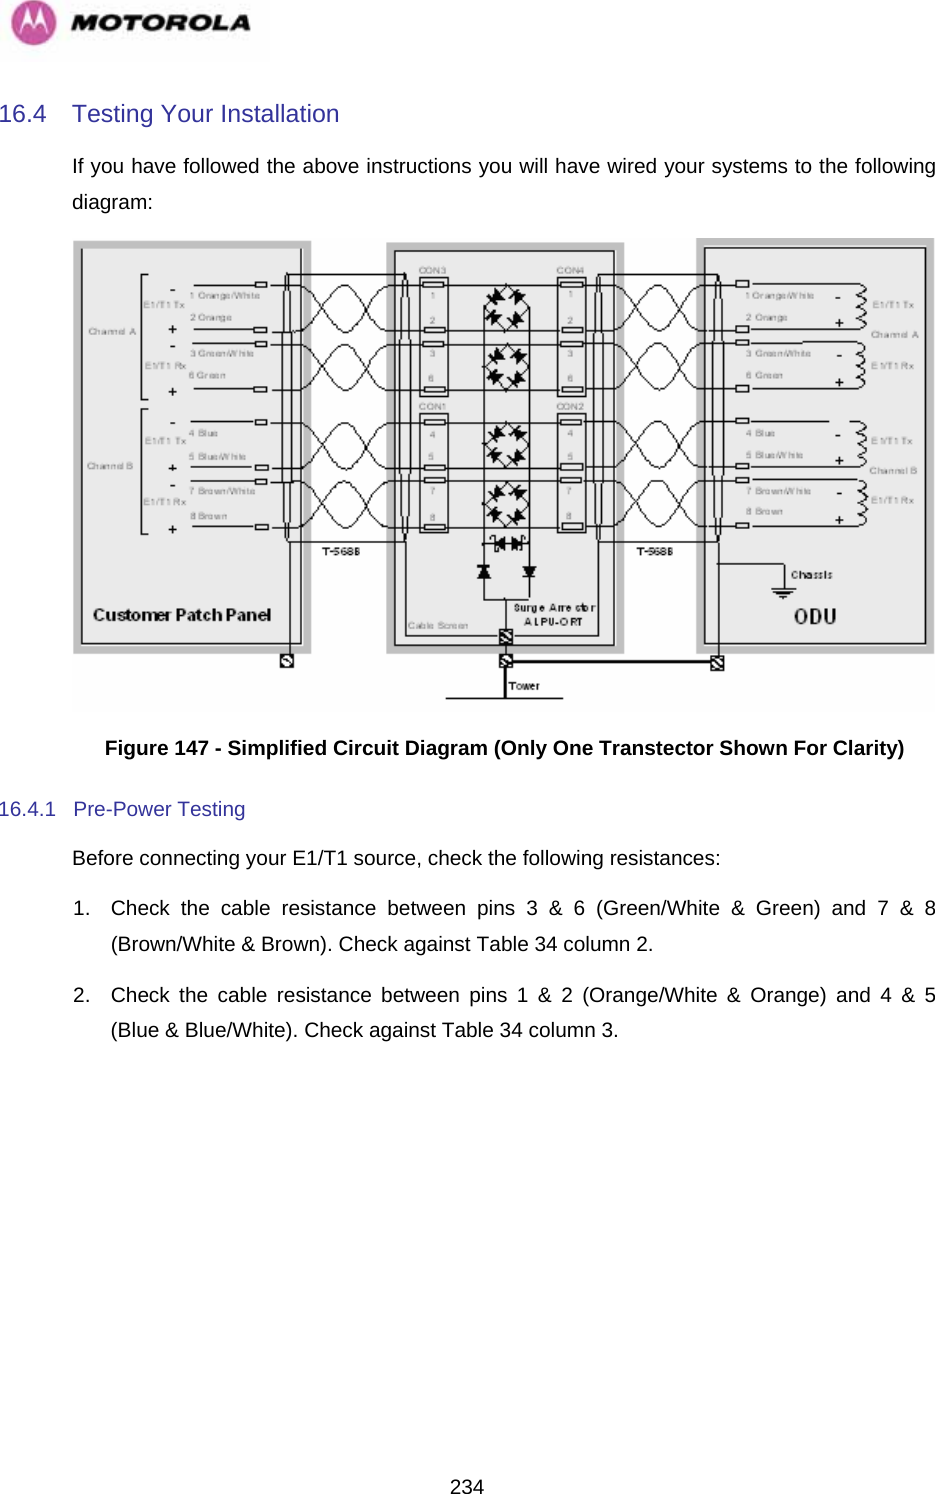   23416.4  Testing Your Installation If you have followed the above instructions you will have wired your systems to the following diagram:  Figure 147 - Simplified Circuit Diagram (Only One Transtector Shown For Clarity) 16.4.1 Pre-Power Testing Before connecting your E1/T1 source, check the following resistances: 1.  Check the cable resistance between pins 3 &amp; 6 (Green/White &amp; Green) and 7 &amp; 8 (Brown/White &amp; Brown). Check against Table 34 column 2. 2.  Check the cable resistance between pins 1 &amp; 2 (Orange/White &amp; Orange) and 4 &amp; 5 (Blue &amp; Blue/White). Check against Table 34 column 3. 